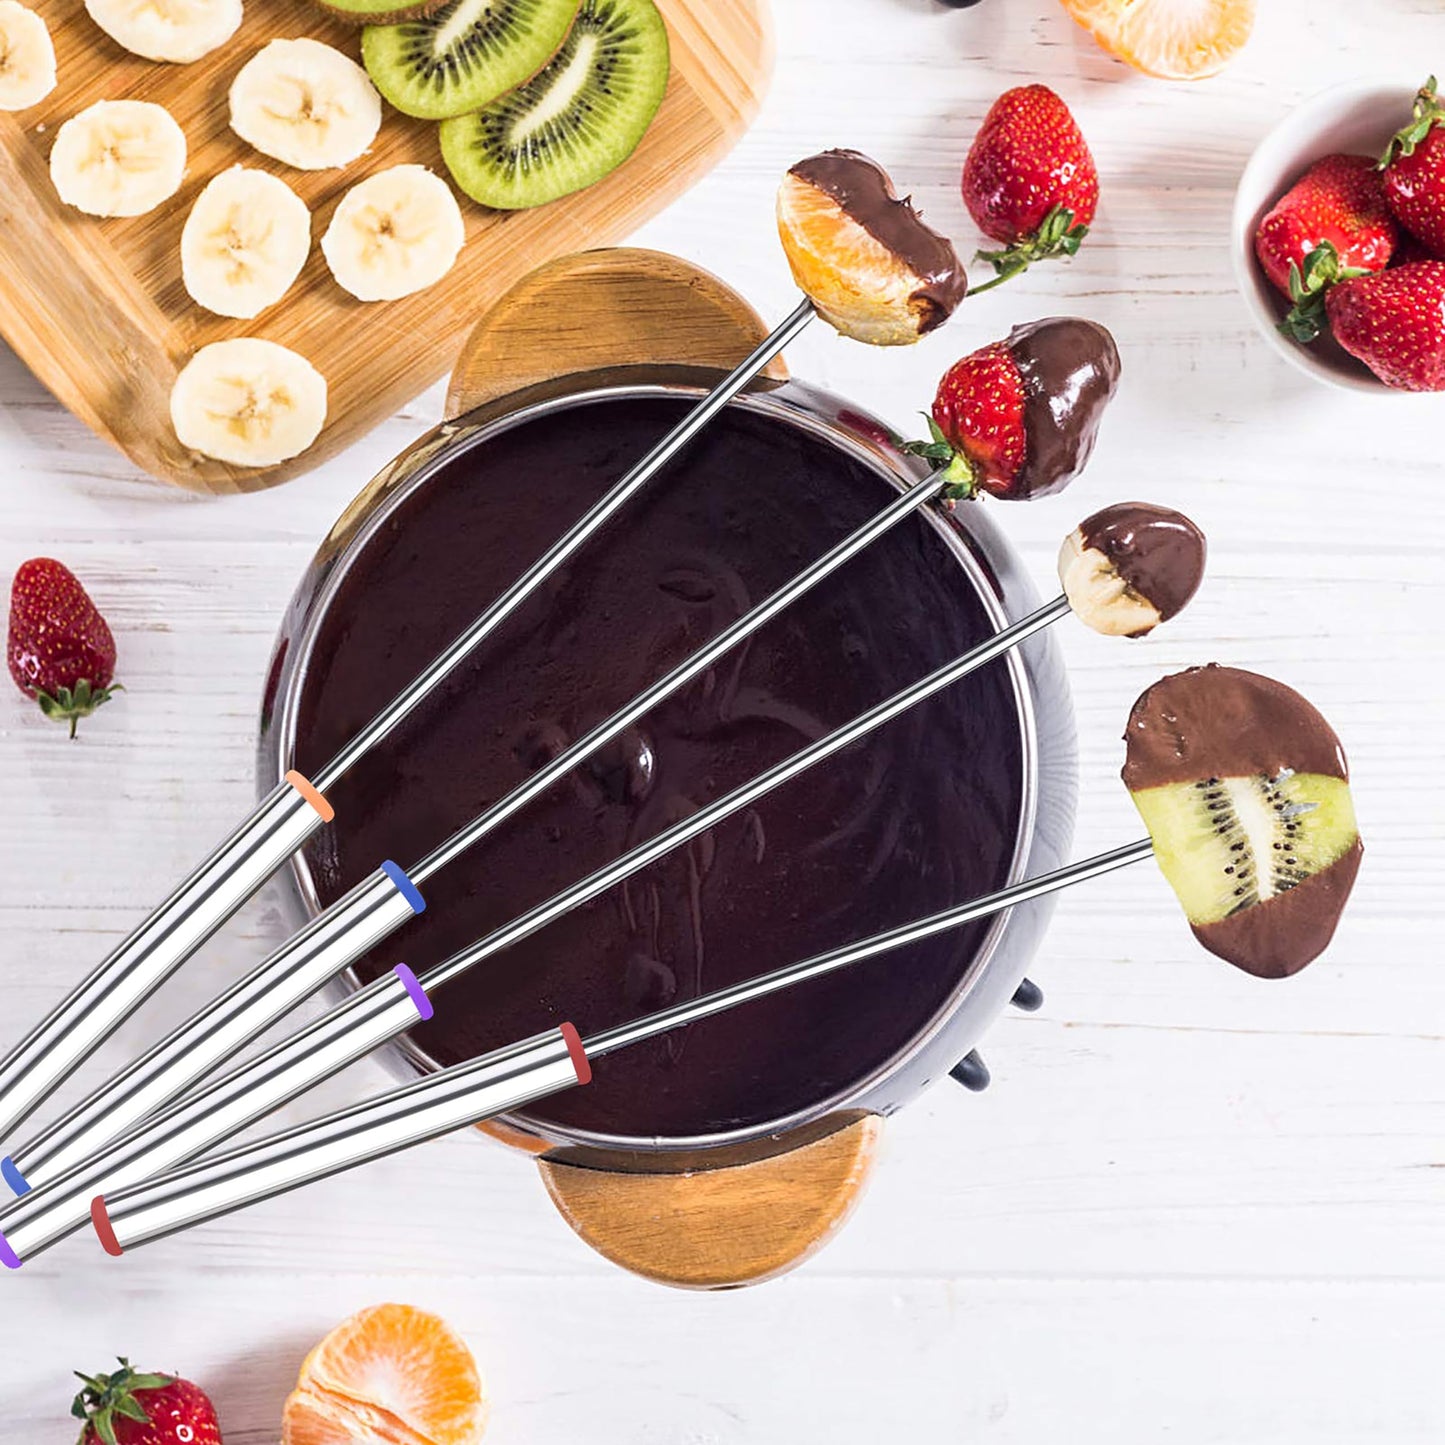 15pcs 9.6 Inch Fondue Sticks, Smores Sticks, Stainless Steel Fondue Forks with Heat Resistant Handle for Roast Meat Chocolate Dessert Cheese Marshmallows